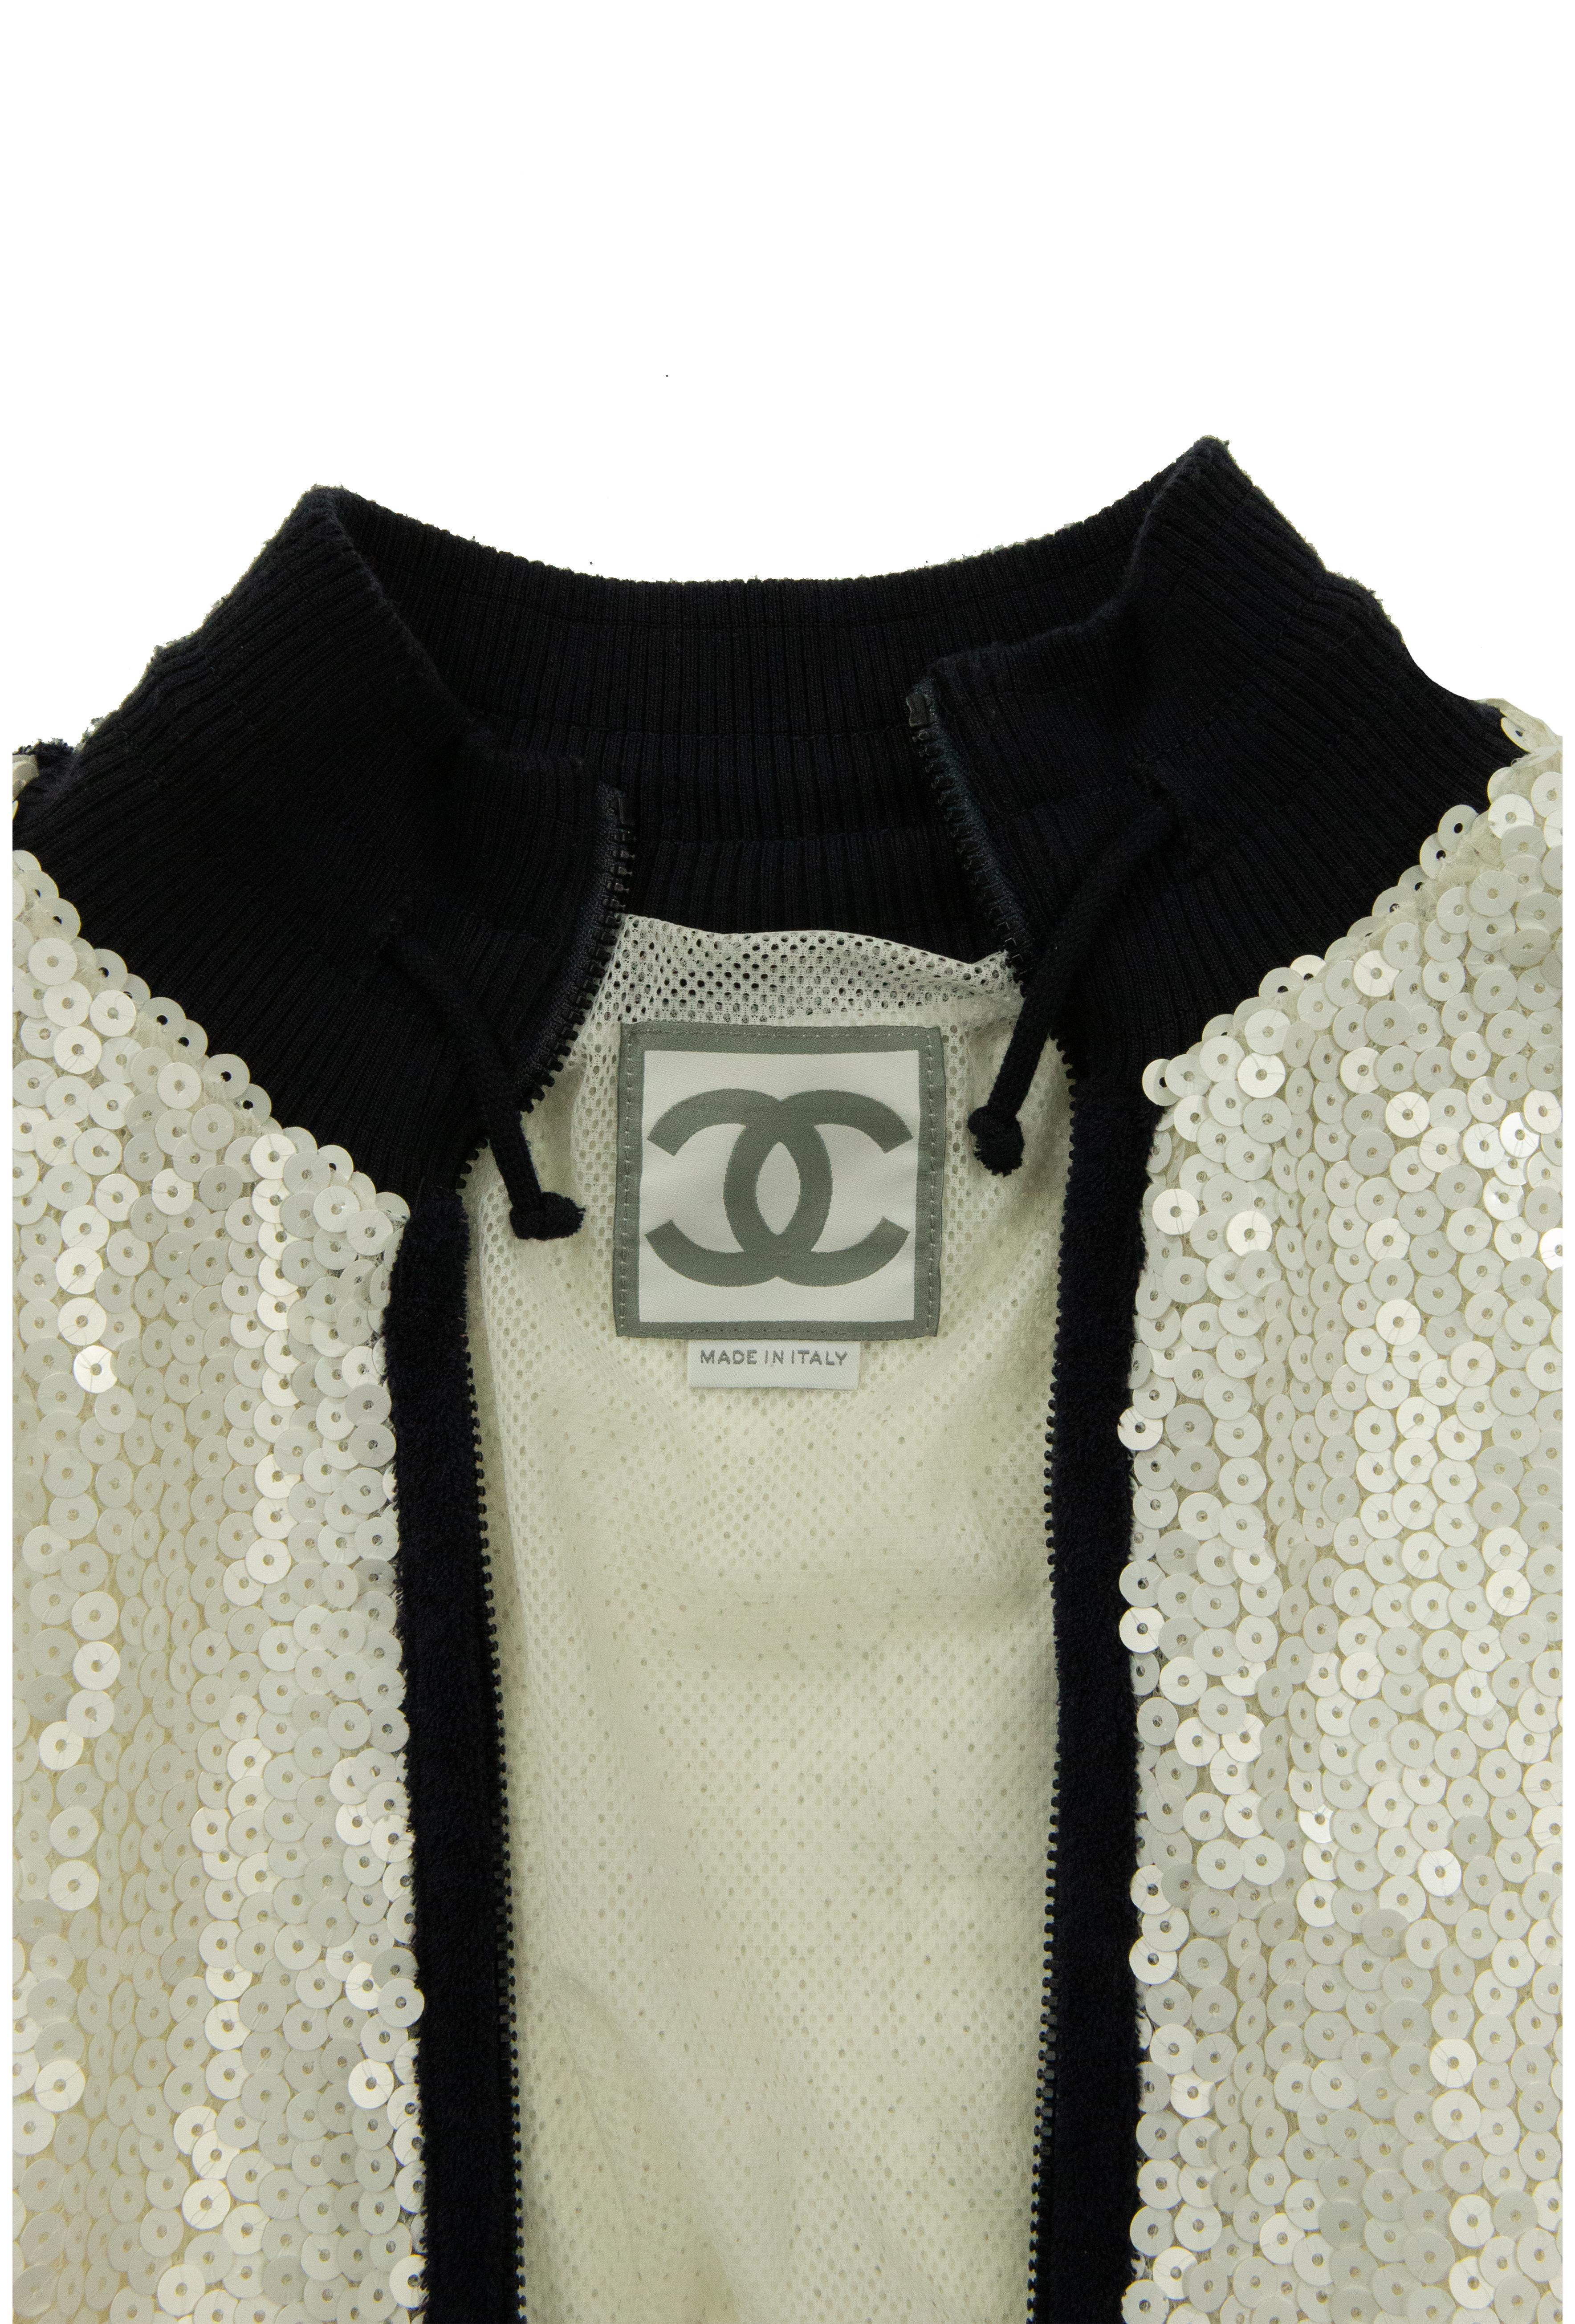 Chanel 2008 Cruise Collection Sequin Jacket 1